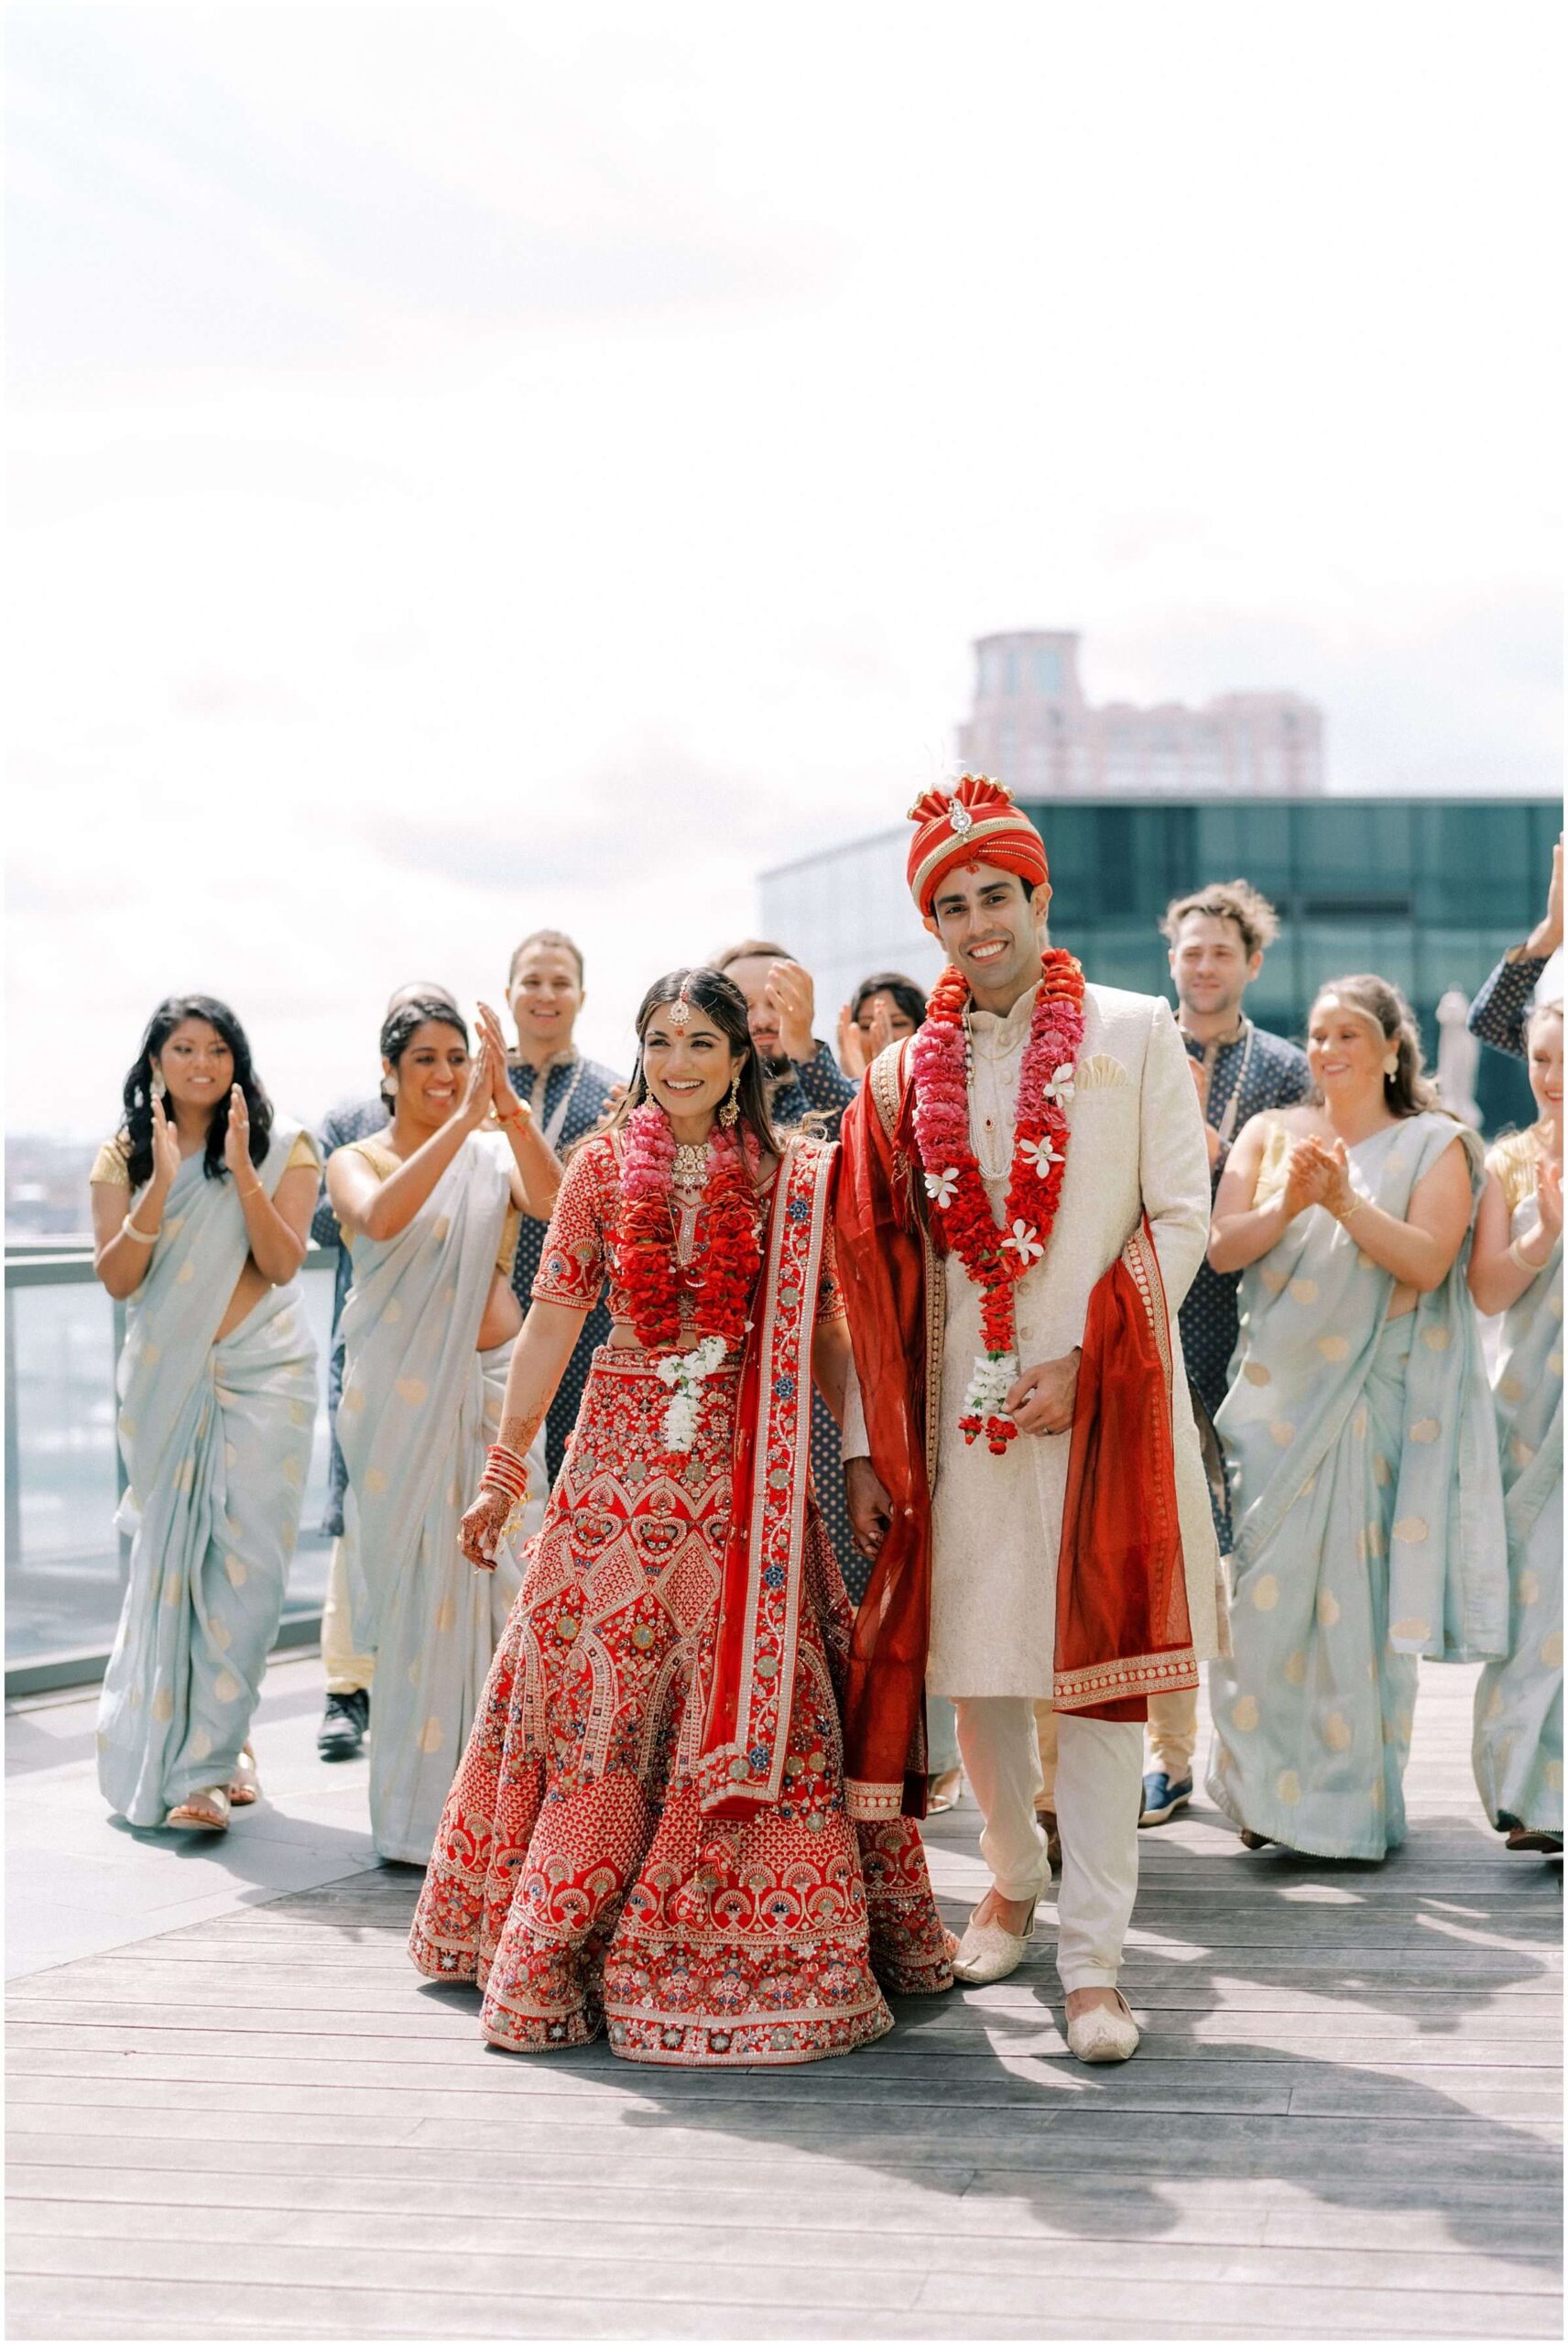 Indian fusion wedding at the Four Seasons Hotel in Baltimore, MD